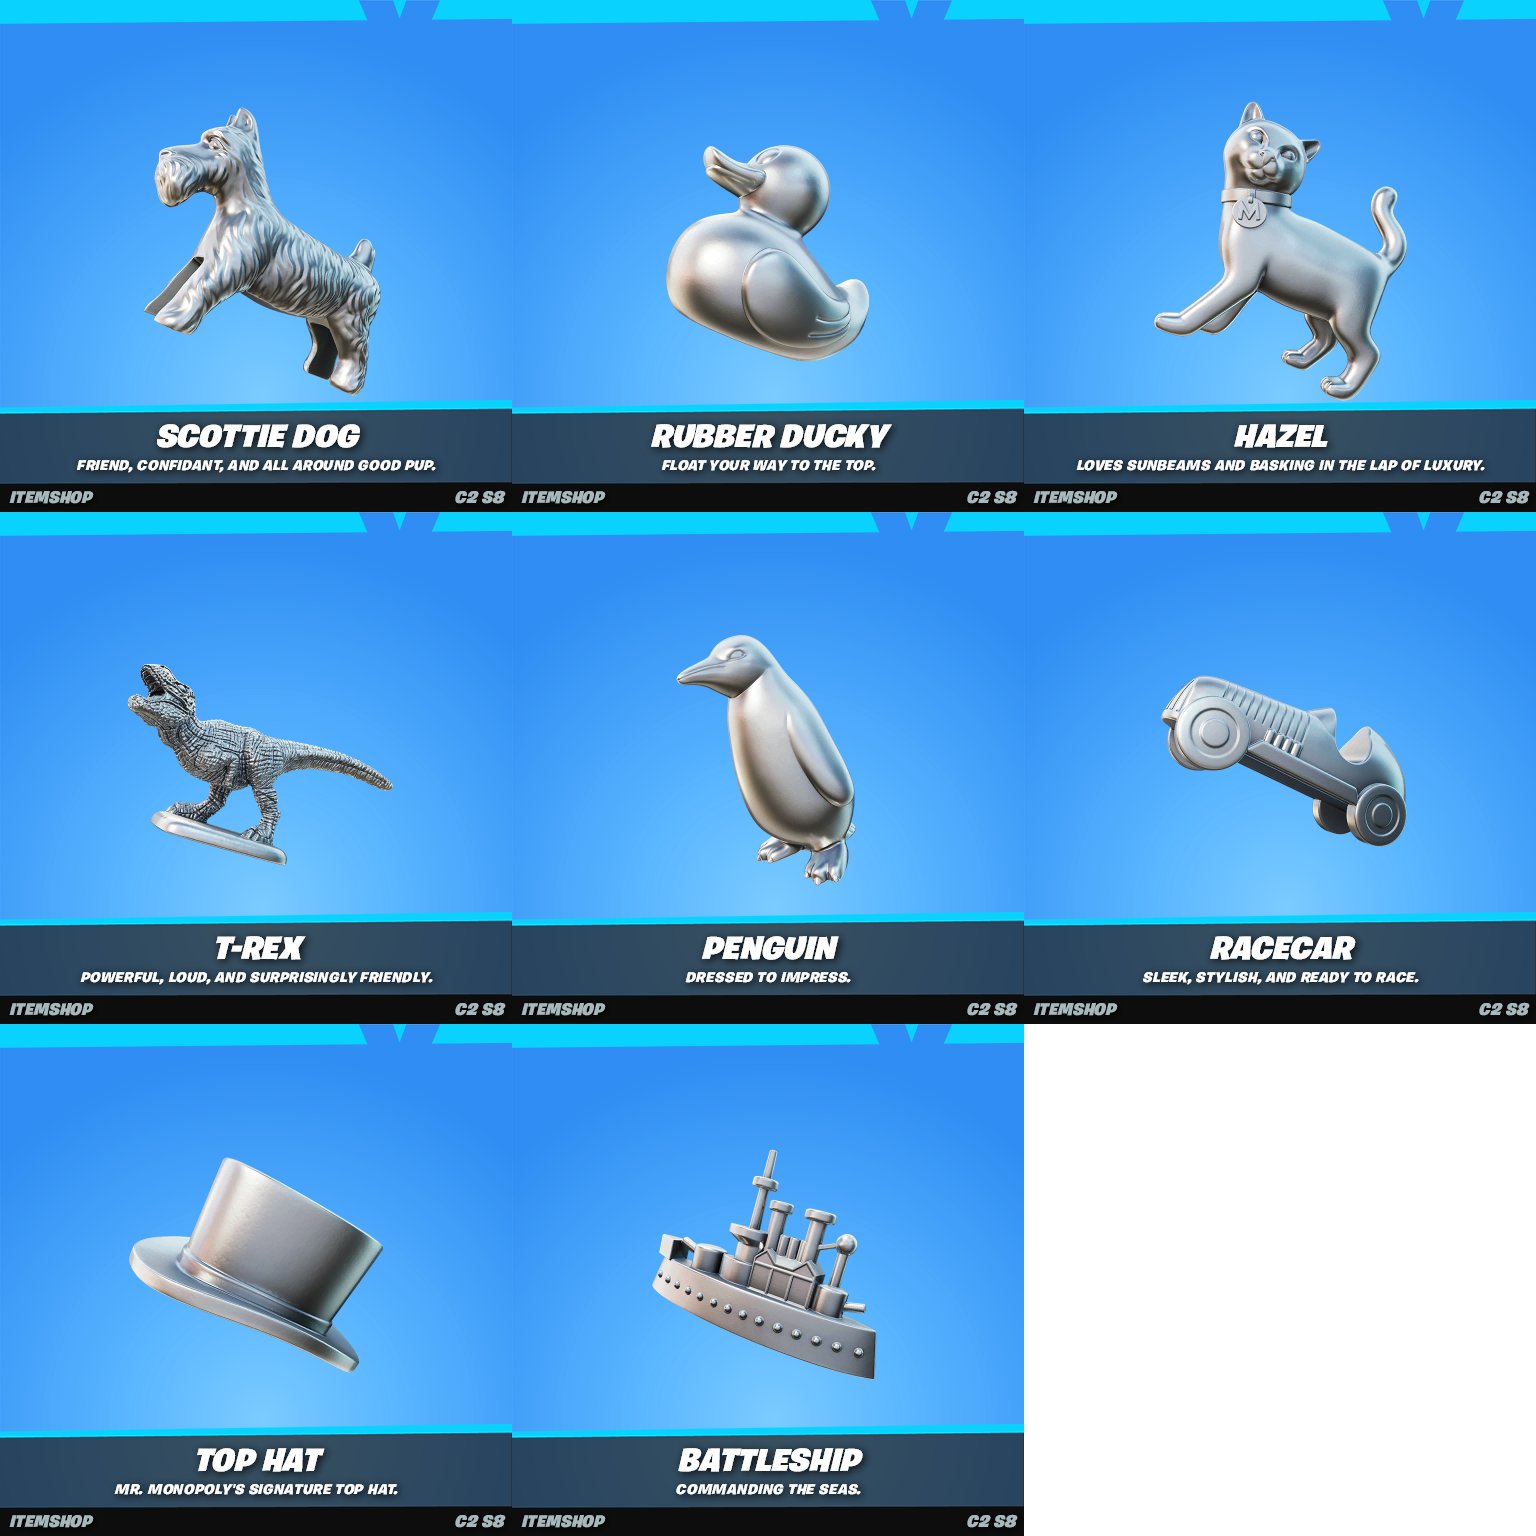 You can get Monopoly back blings in Fortnite for purchasing a board game by Hasbro